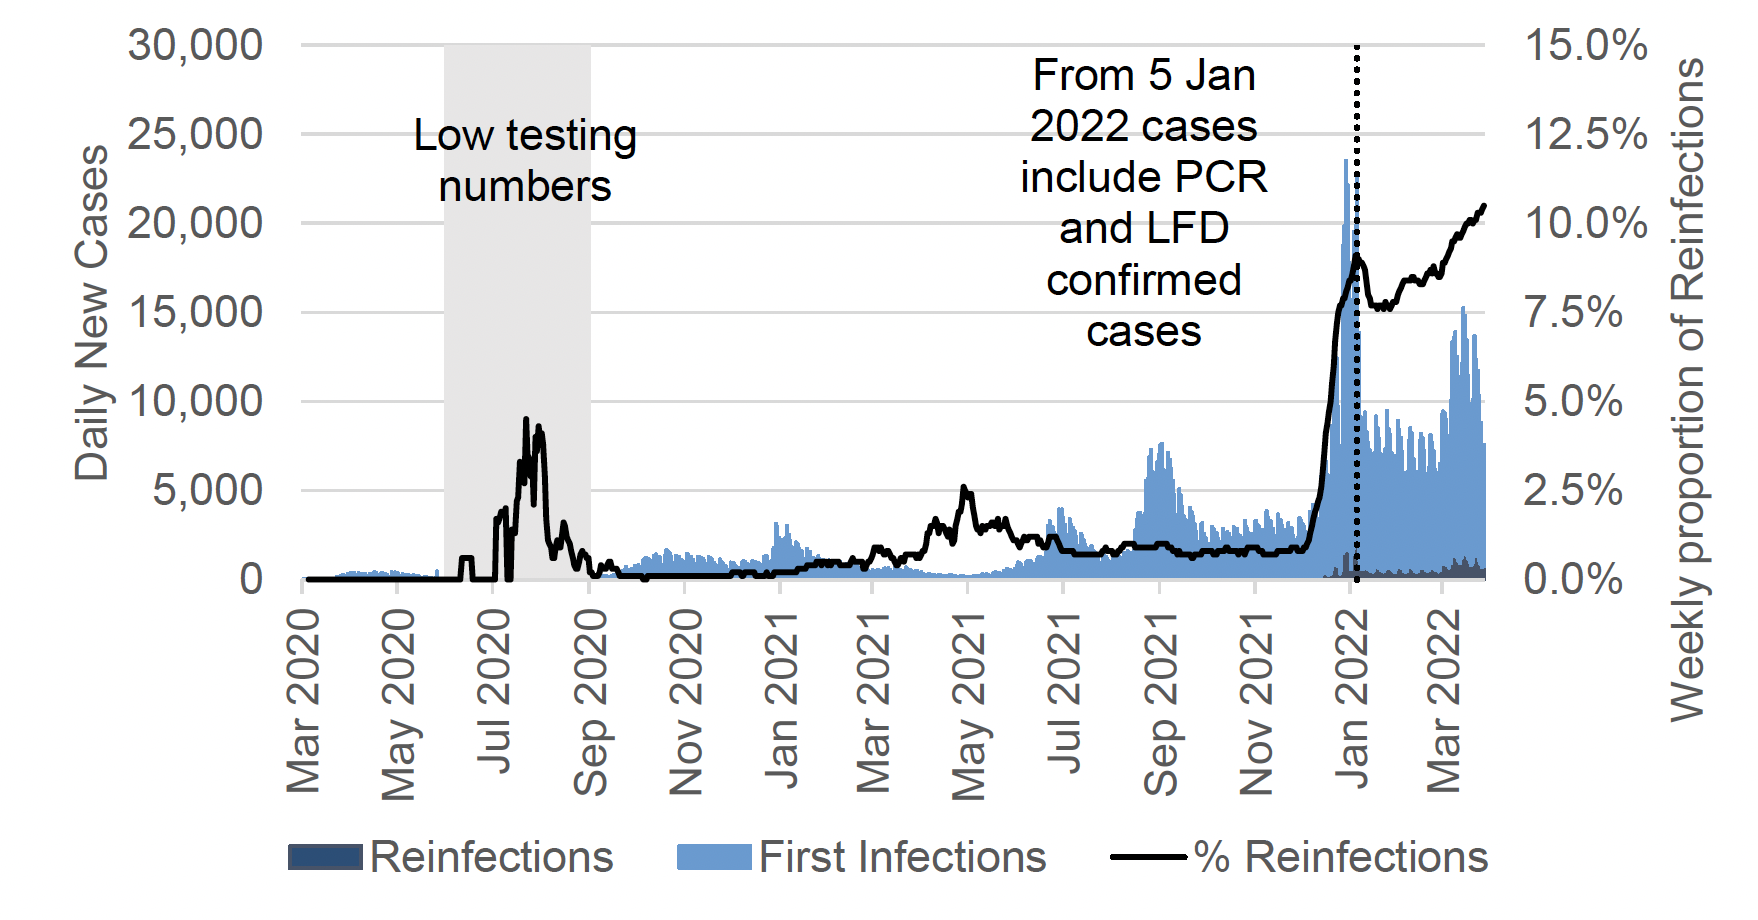 a bar chart showing daily PCR and LFD case numbers by episode of infection (first infection or reinfection) by specimen date from March 2020 to March 2022 with a line showing the seven-day average proportion of daily cases that are reinfections. The number of daily reinfection cases is not visible until late 2021. The seven-day average proportion of reinfections peaked in July 2020, April 2021 and early January 2022, and increased to its highest levels so far in March 2022. The chart has a note that says: “from 5 January 2022 cases include PCR and LFD confirmed cases”. Before 5 January 2022, the case rate includes only PCR confirmed cases.